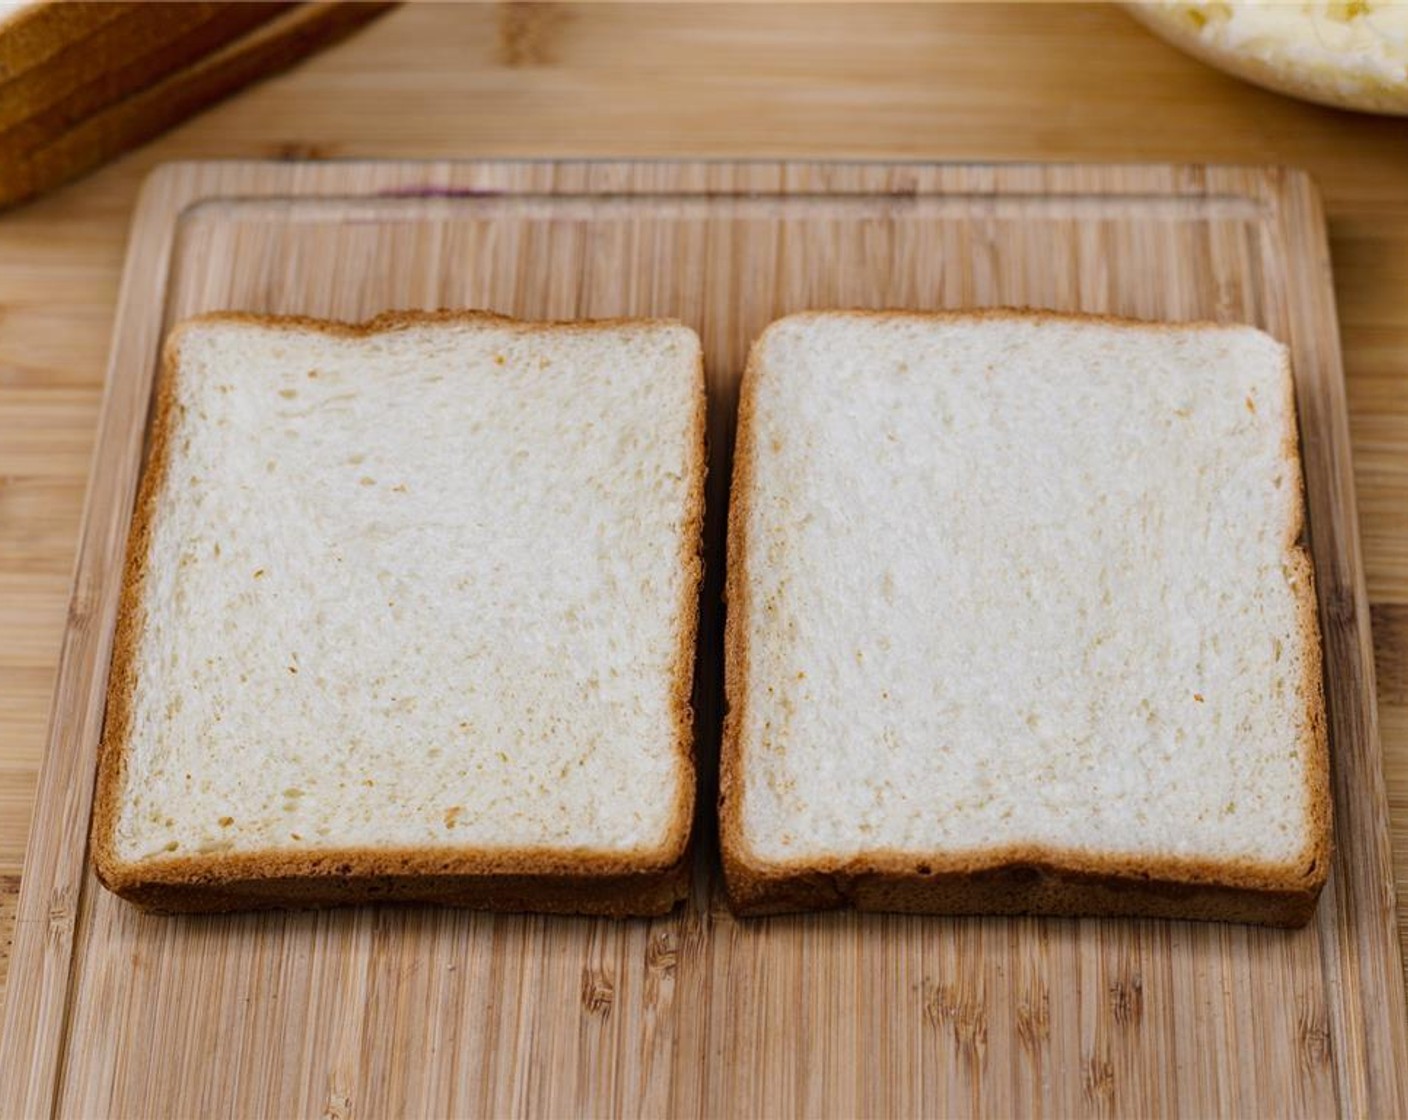 step 3 Place two slices White Sandwich Bread (12 slices) next to one another on a wooden chopping board.